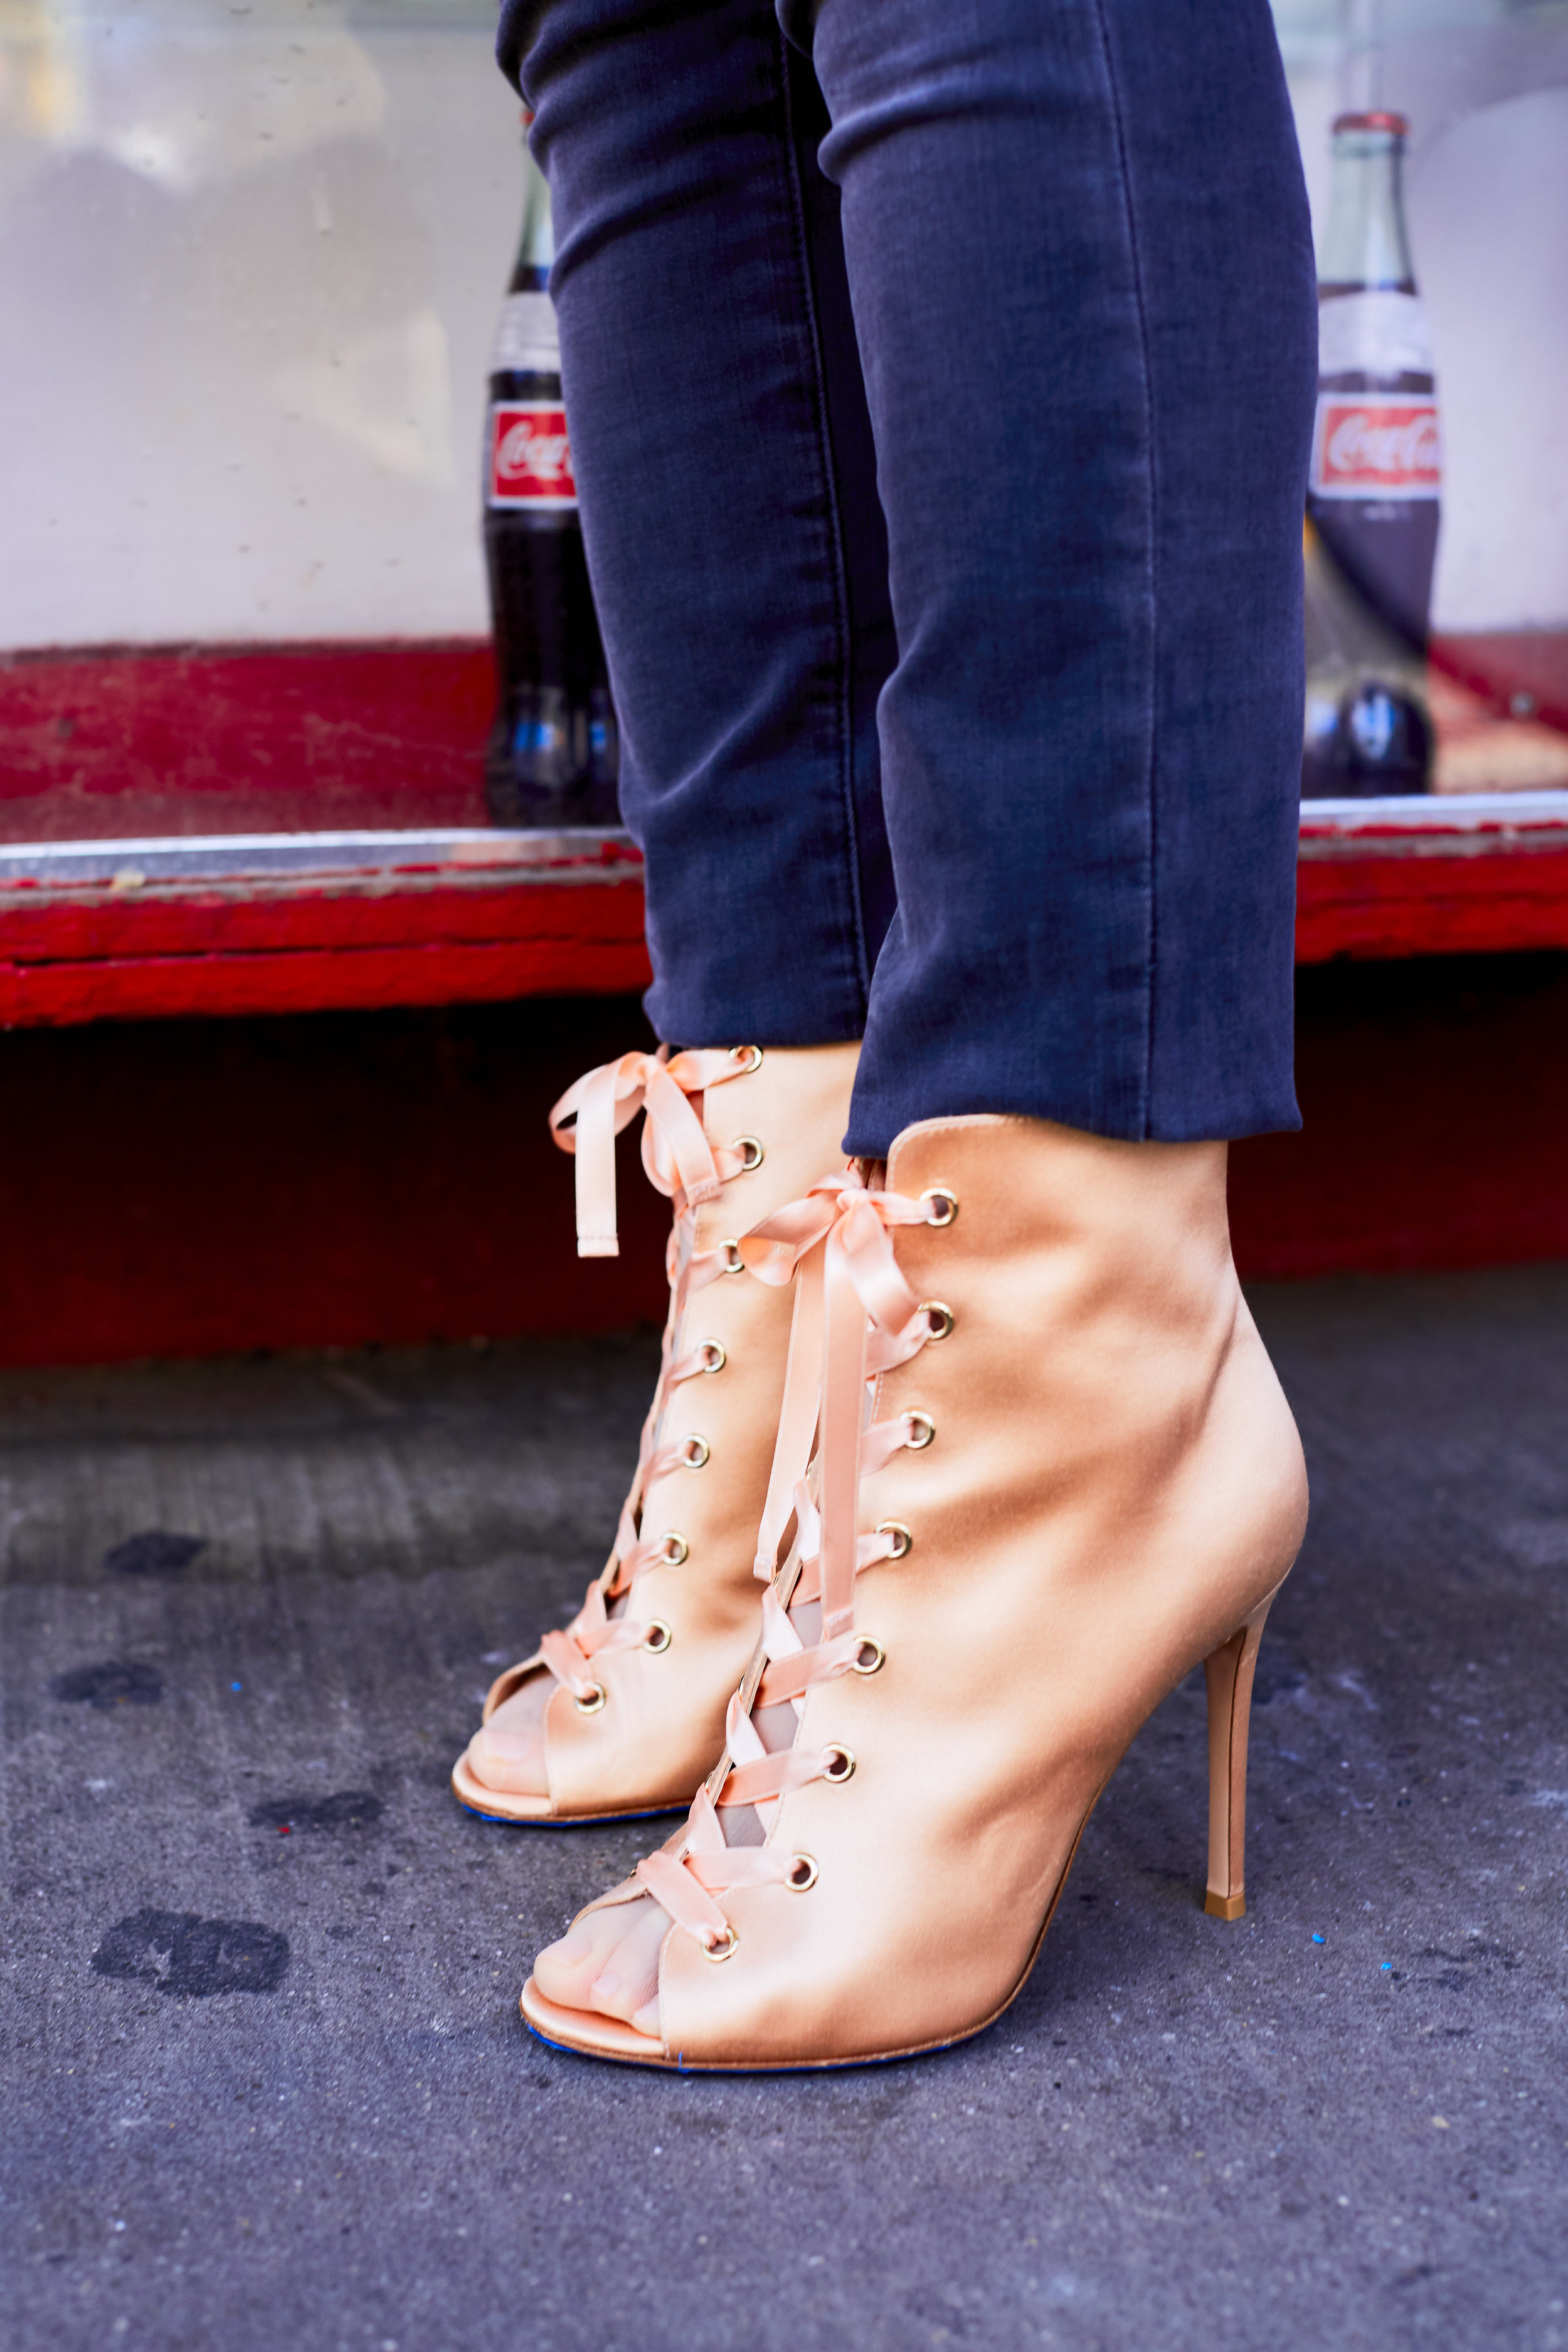 Move Over Manolos, Carrie Has Found A New Shoe Crush In 'And Just